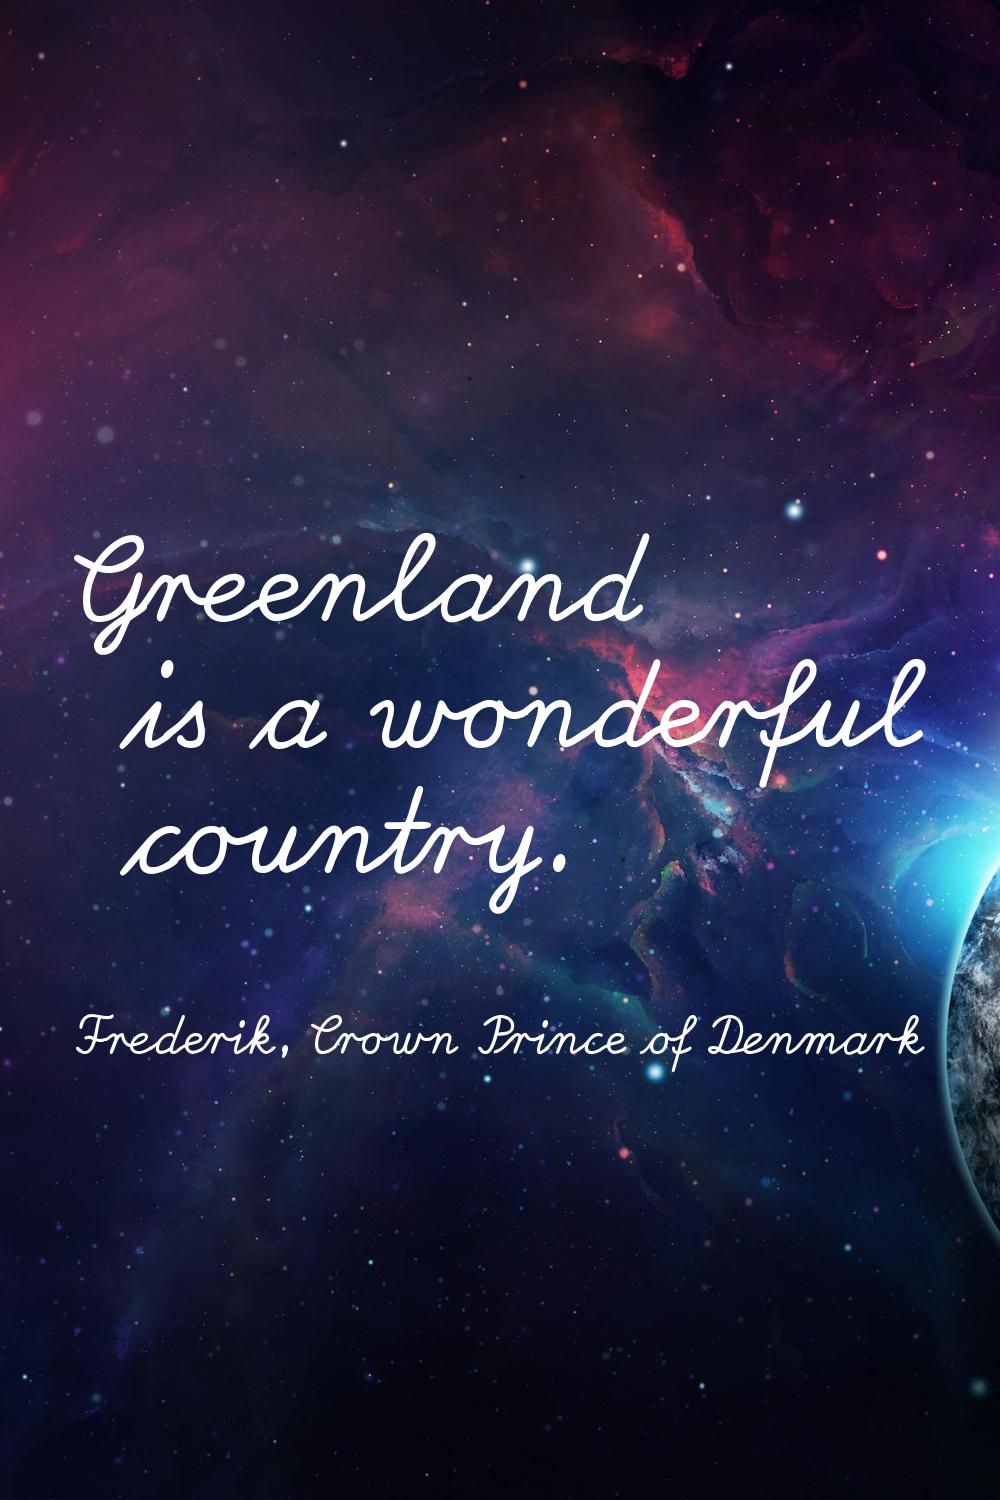 Greenland is a wonderful country.